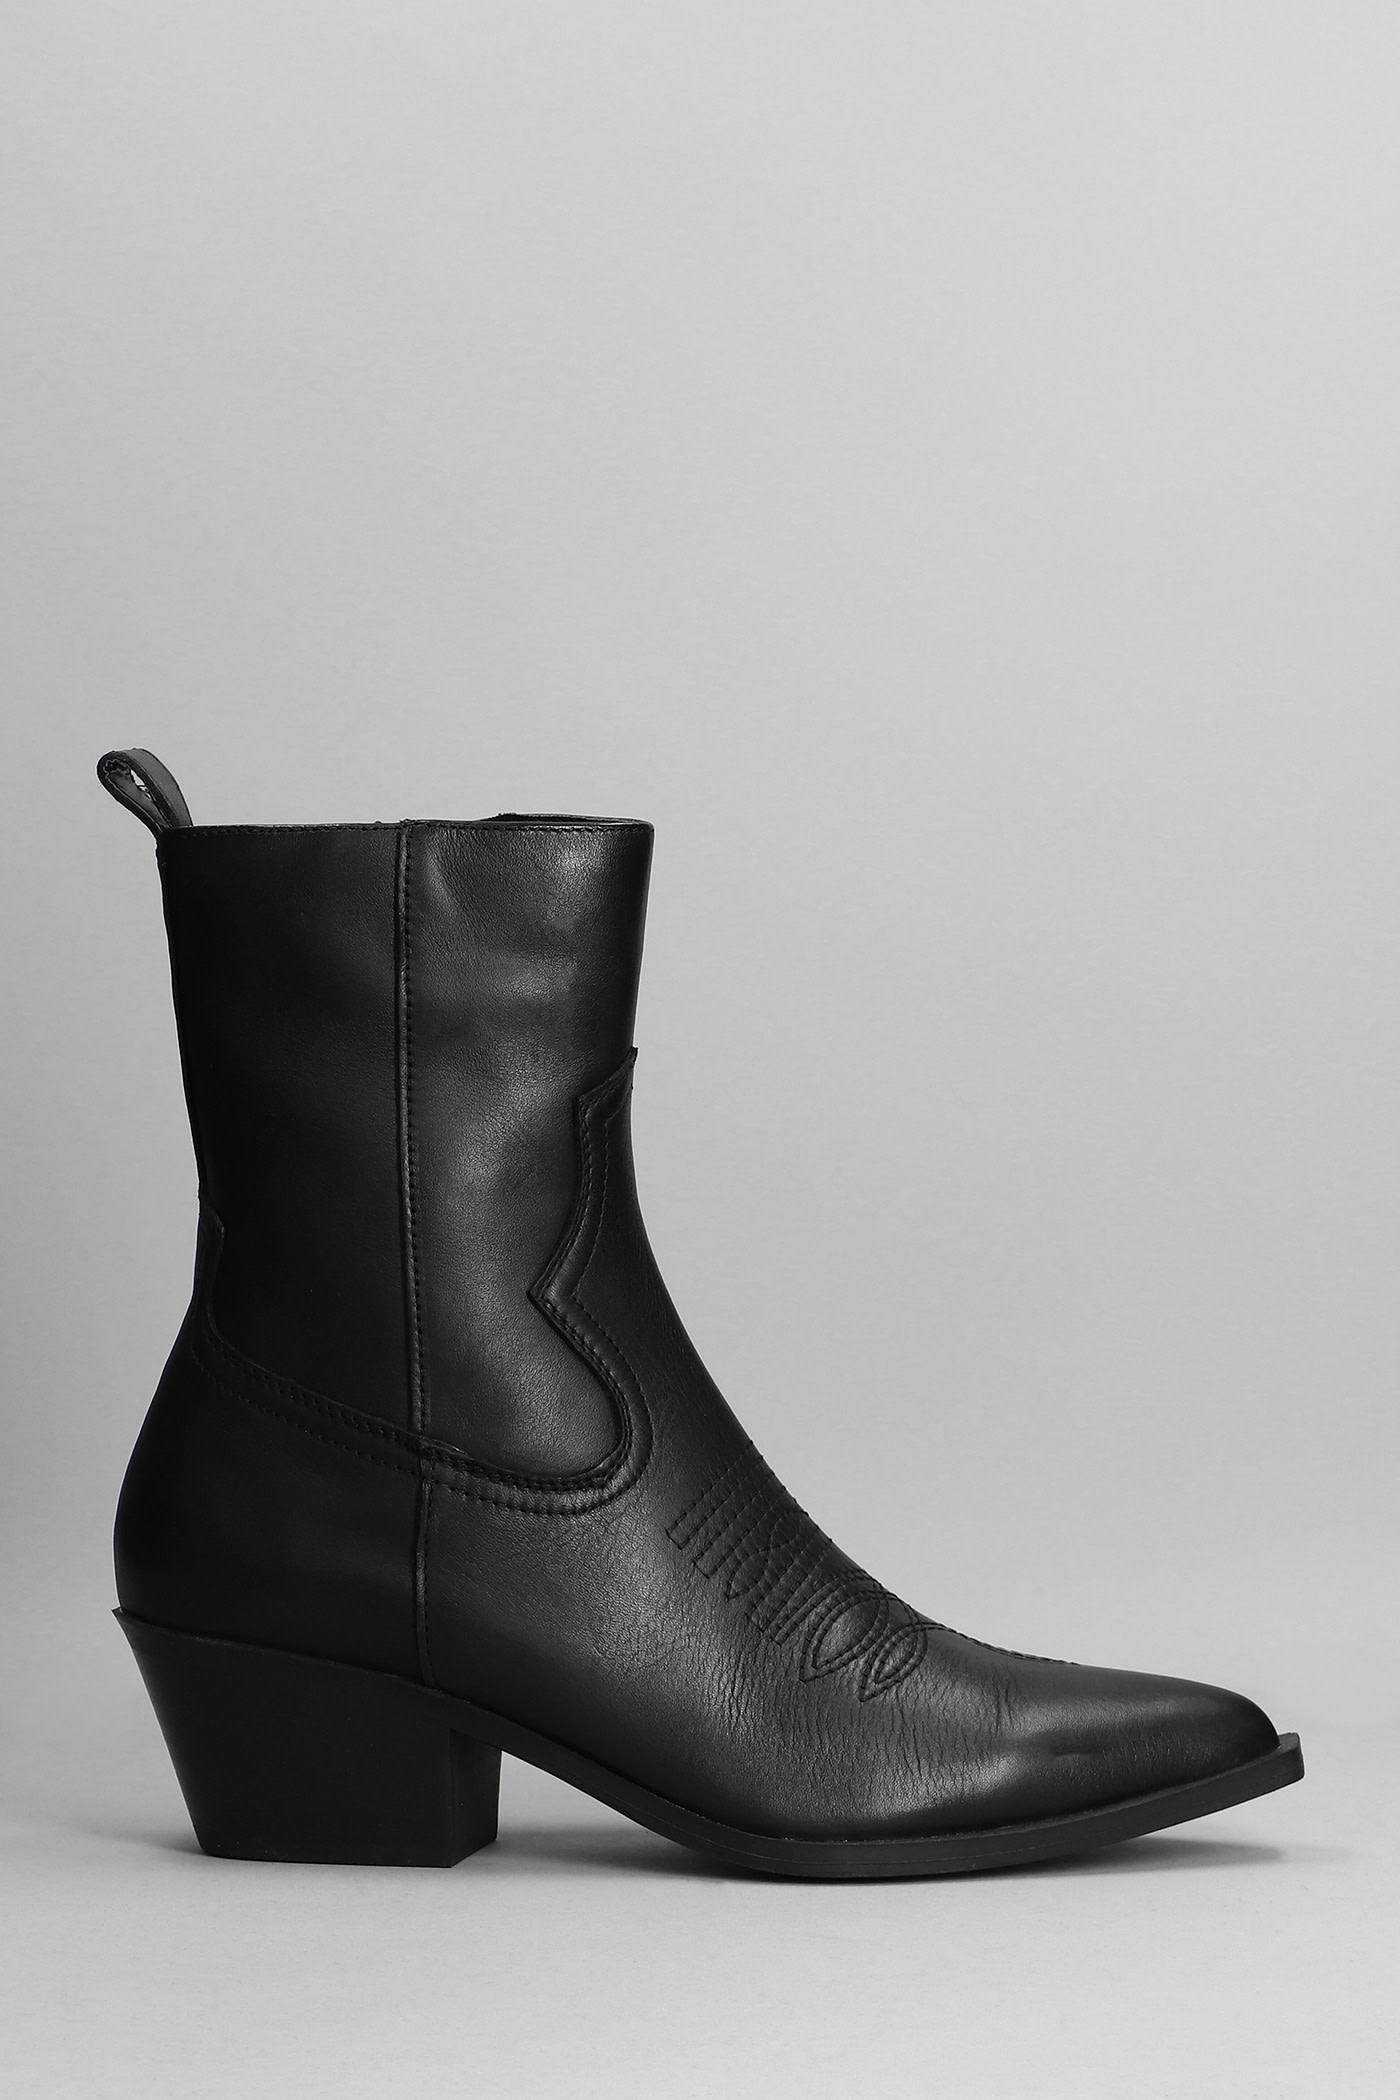 Steve Madden Kendal Texan Ankle Boots In Black Leather | Lyst